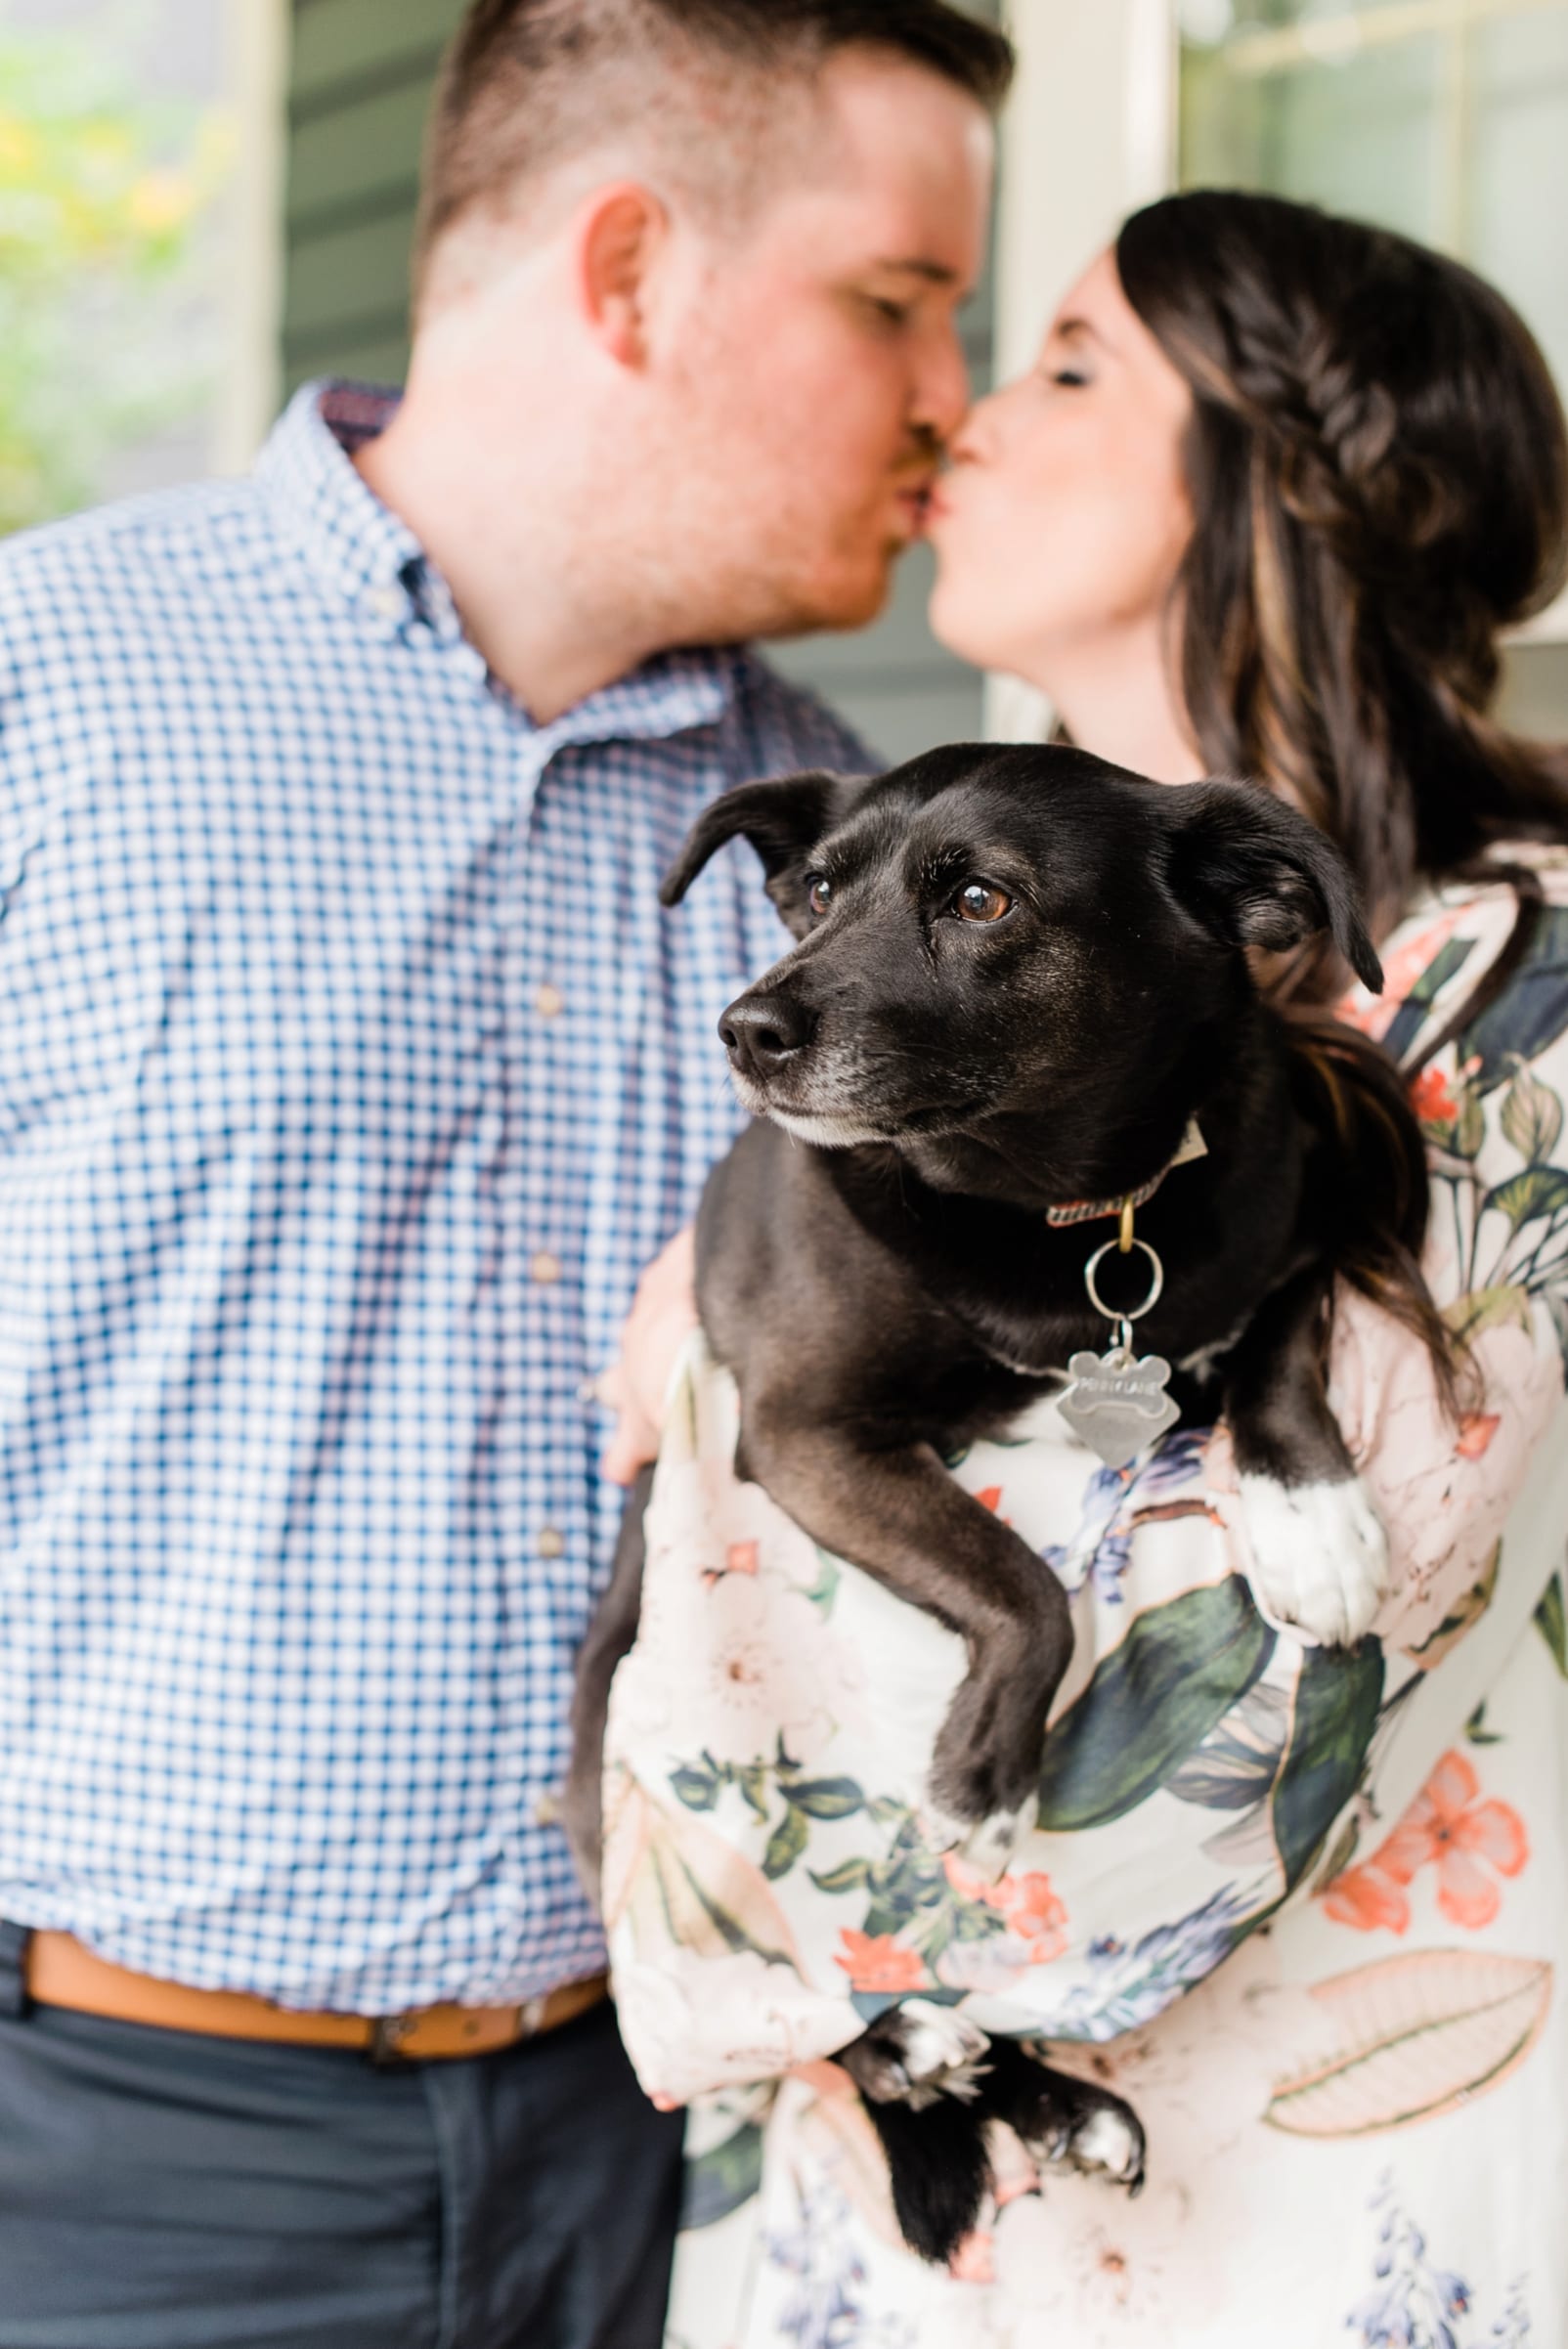 Raleigh couple with their black dog in her arms photo